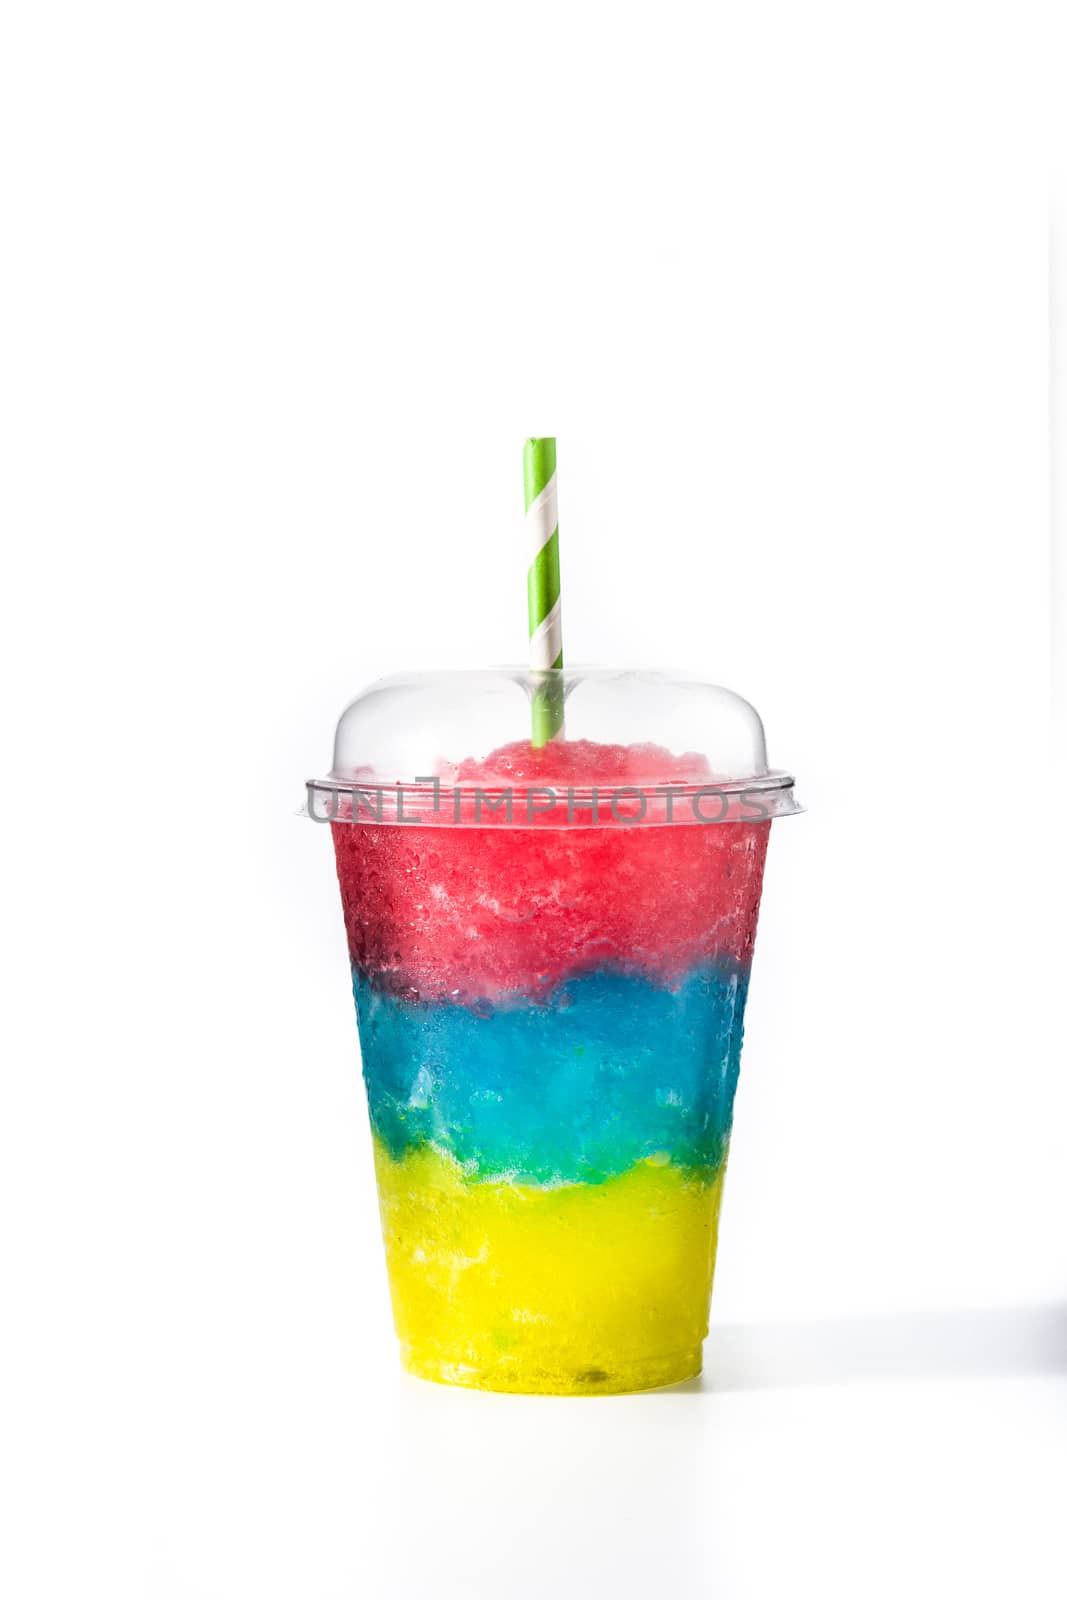 Colorful slushie with straw in plastic cup isolated on white background